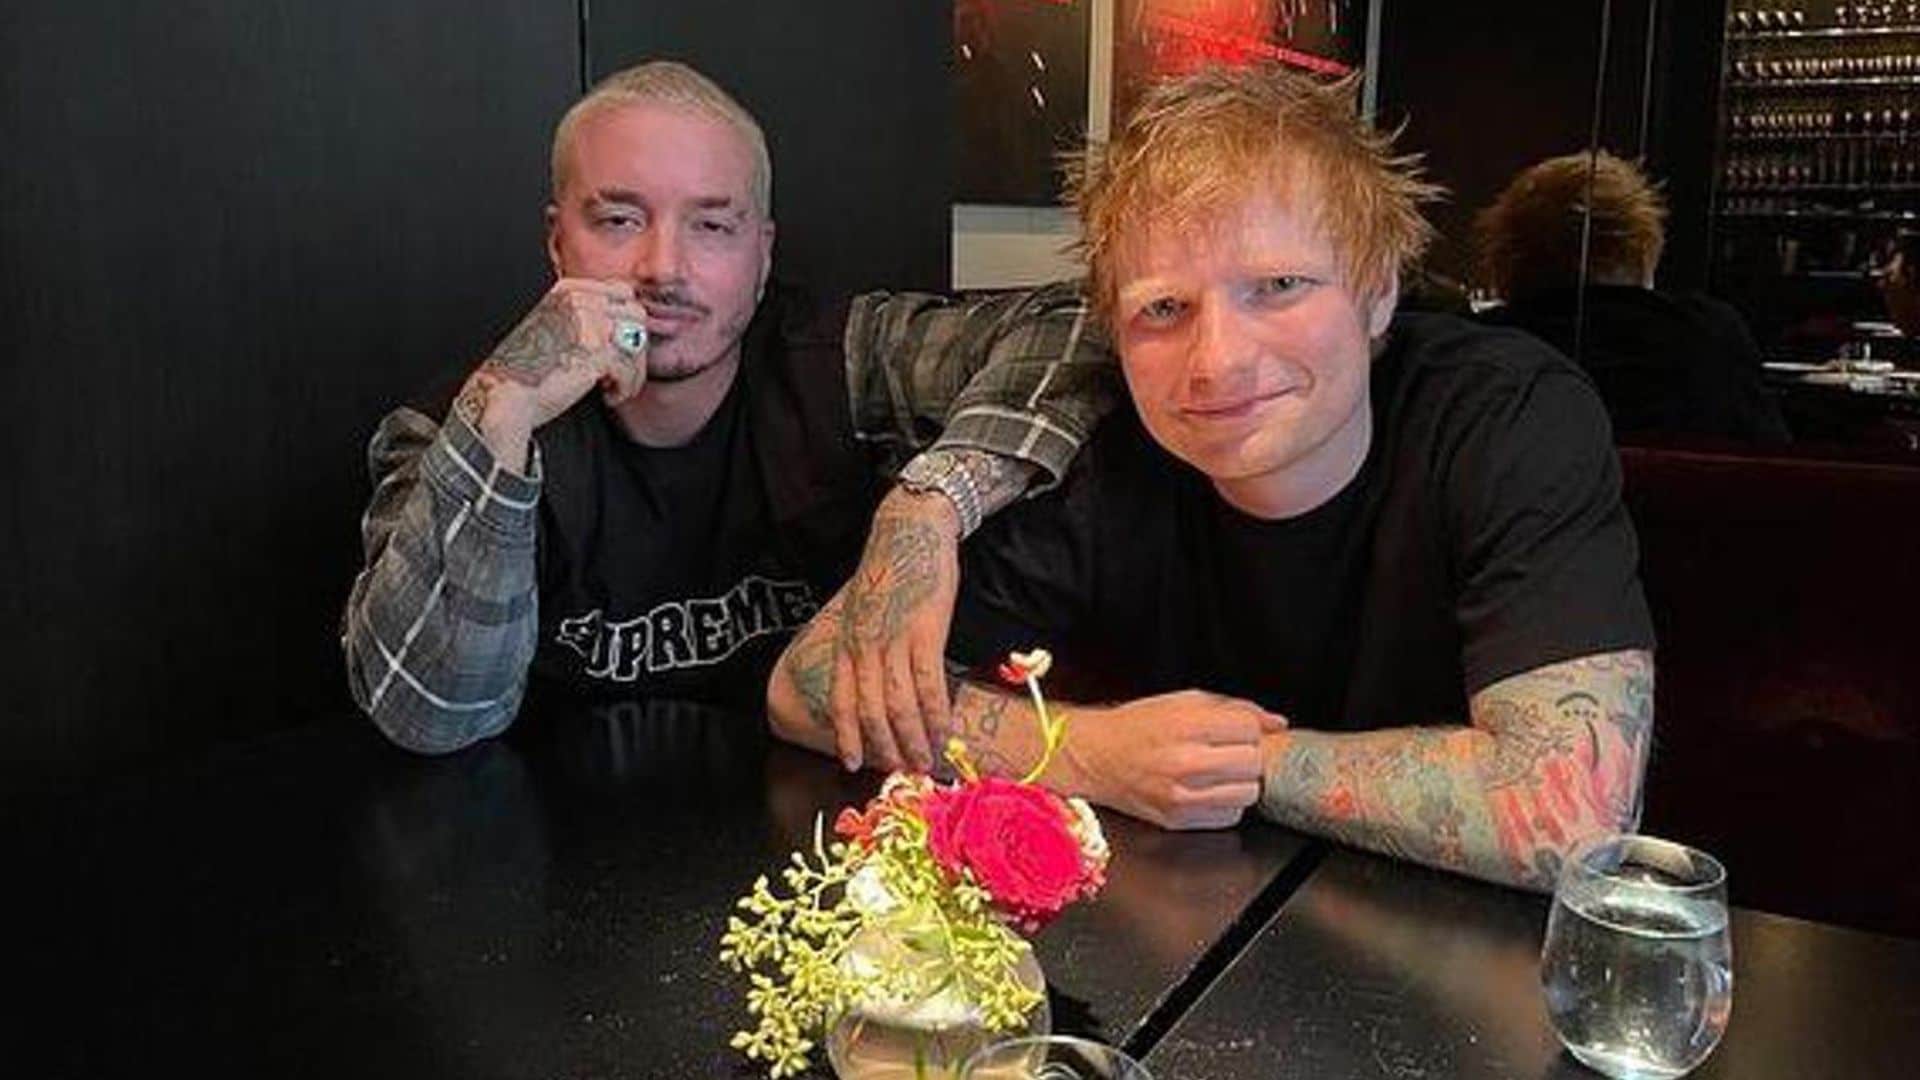 Ed Sheeran and J Balvin are dropping two songs together after meeting at the gym